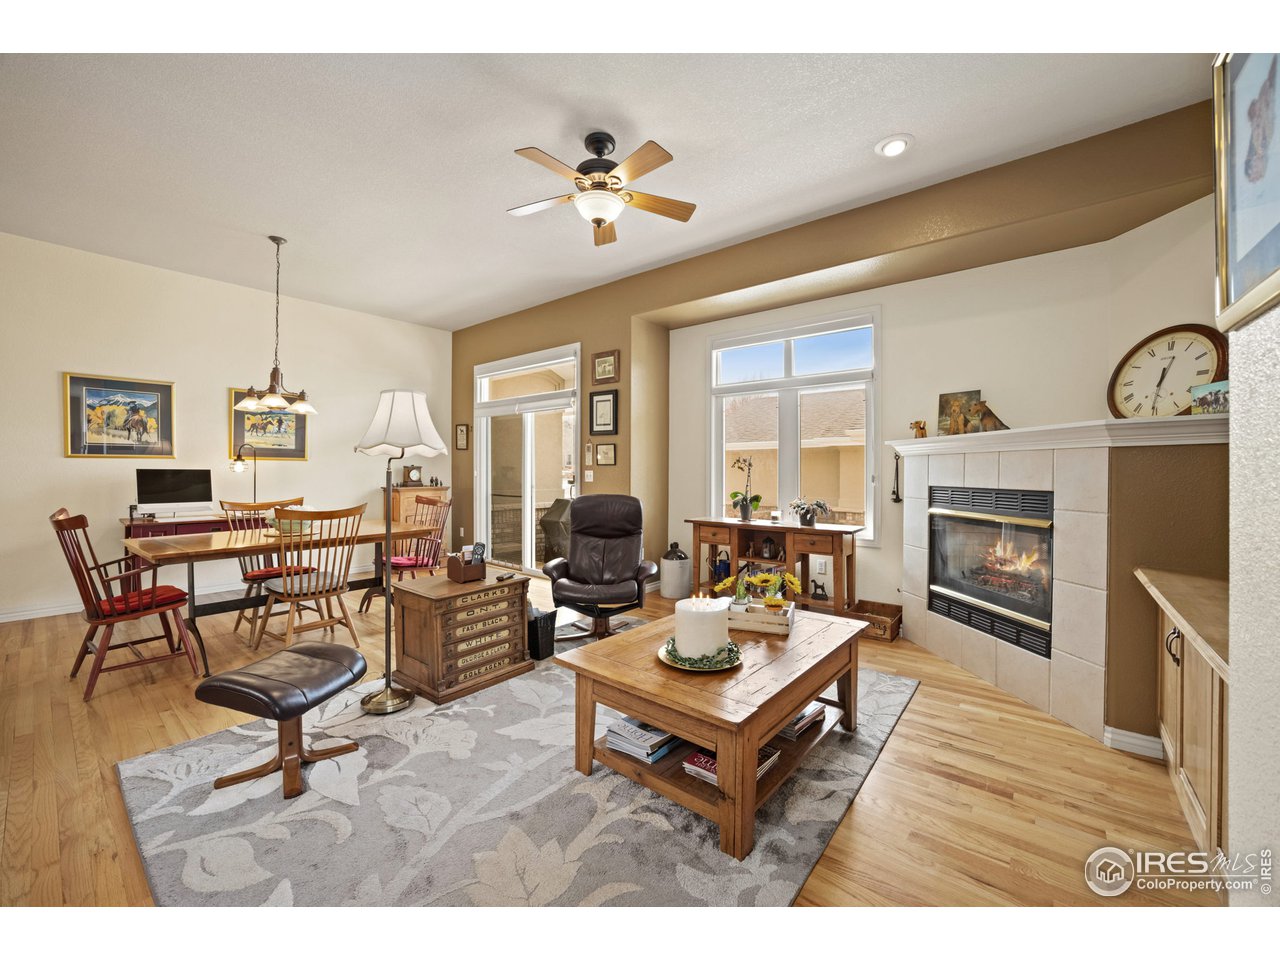 Family room, fireplace, and dining adjoining the kitchen